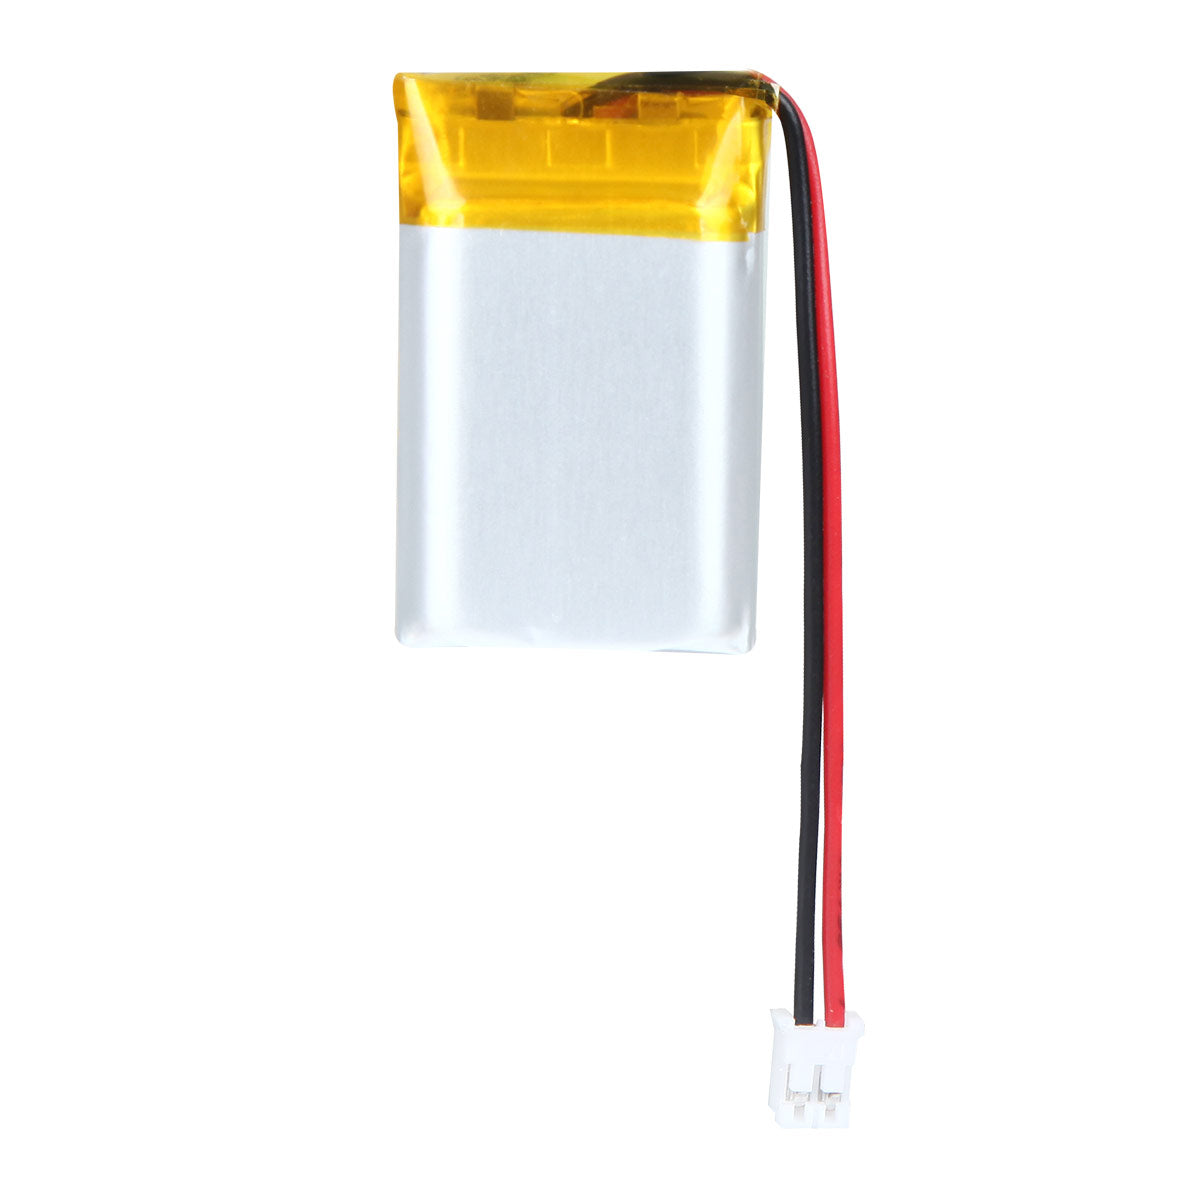 YDL 3.7V 350mAh 652030 Rechargeable Lithium Polymer Battery Length 32mm